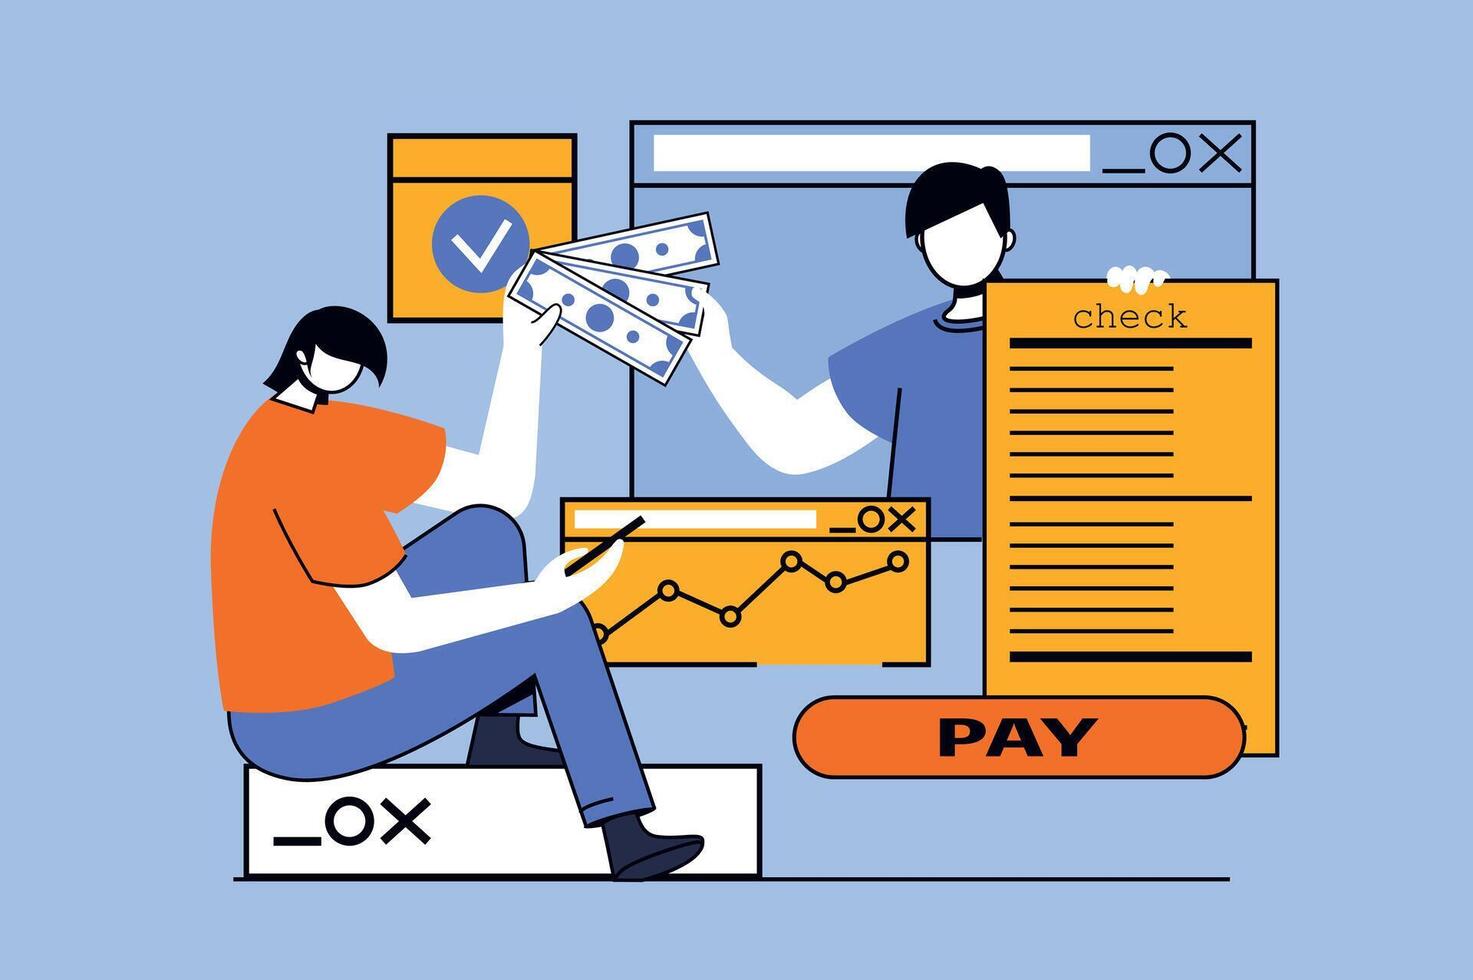 Online payment concept with people scene in flat design for web. Man paying digital check with credit card using mobile application. Vector illustration for social media banner, marketing material.